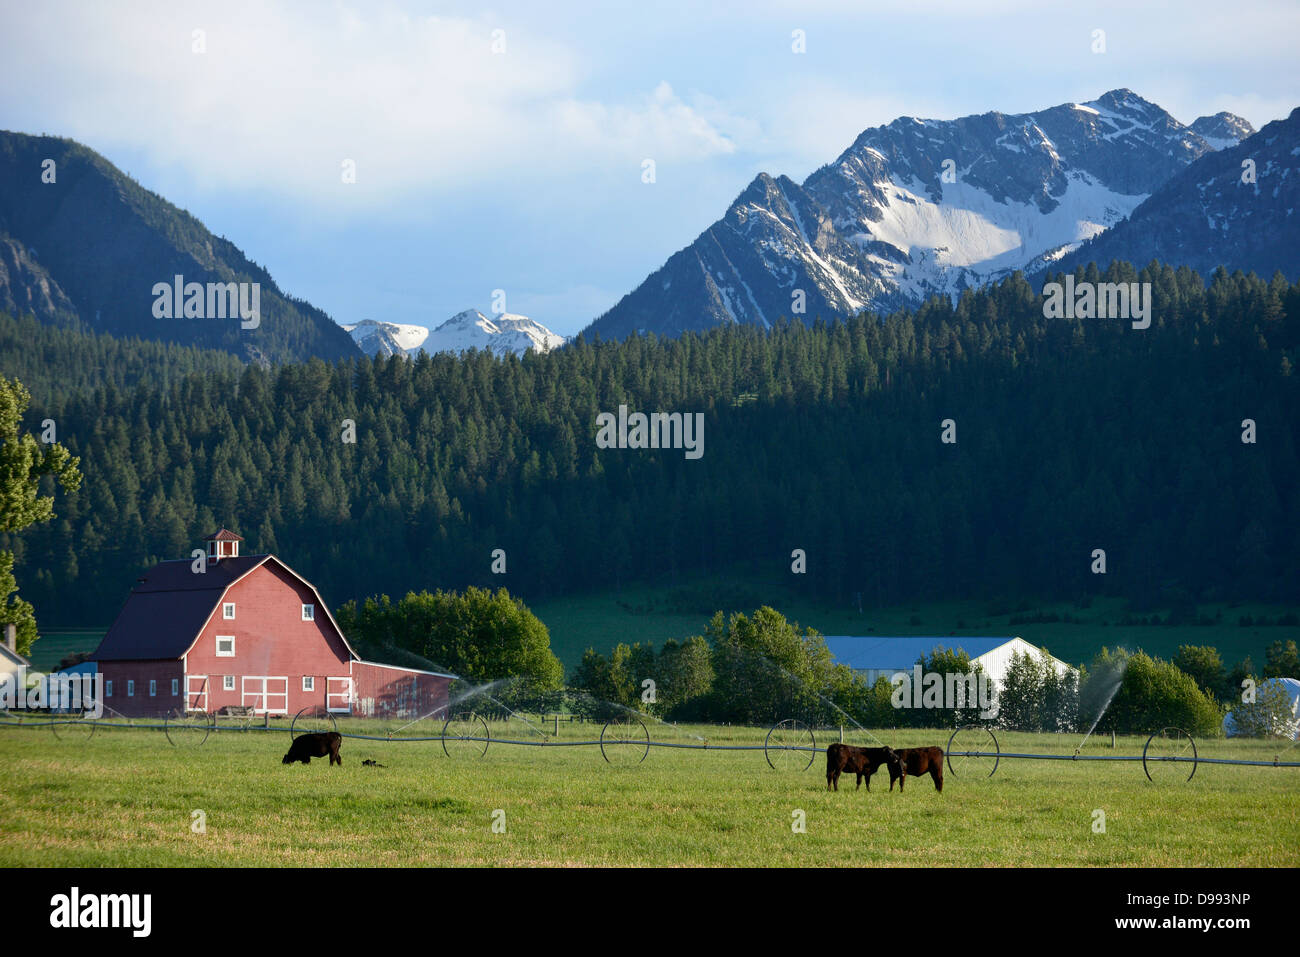 Cows grazing on a farm in the Wallowa Valley, Oregon. Stock Photo